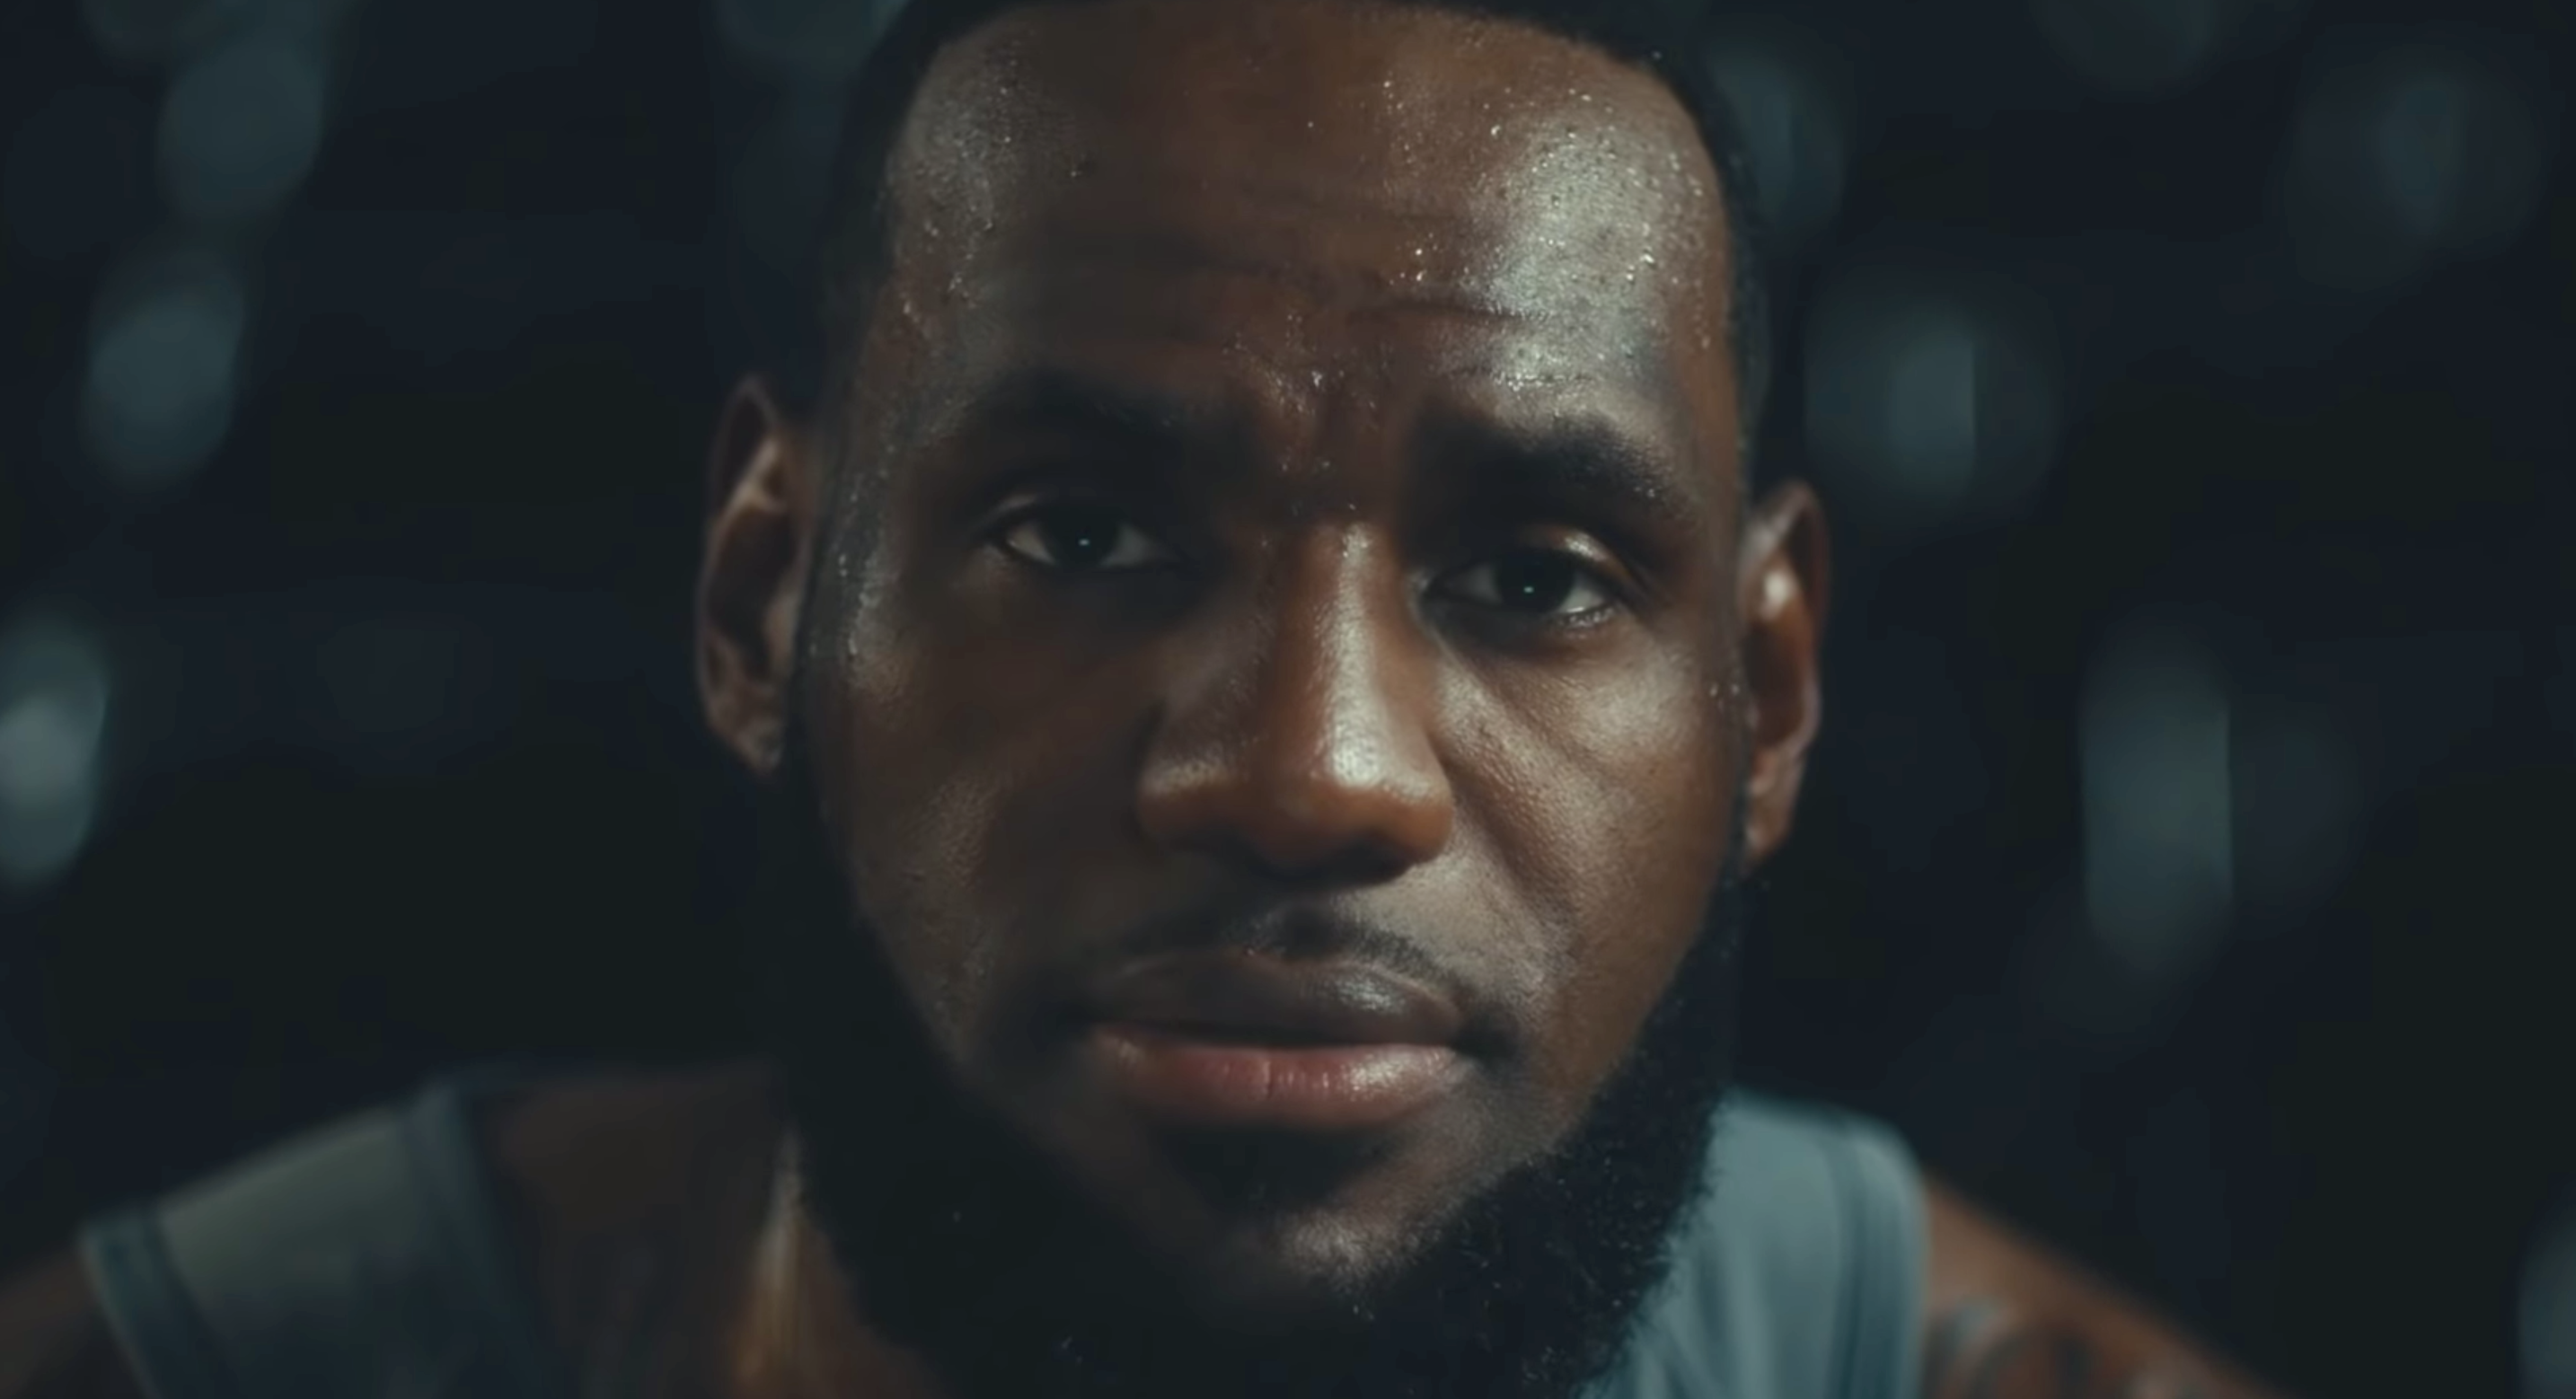 LeBron James in a Liverpool kit shows power of new Nike deal